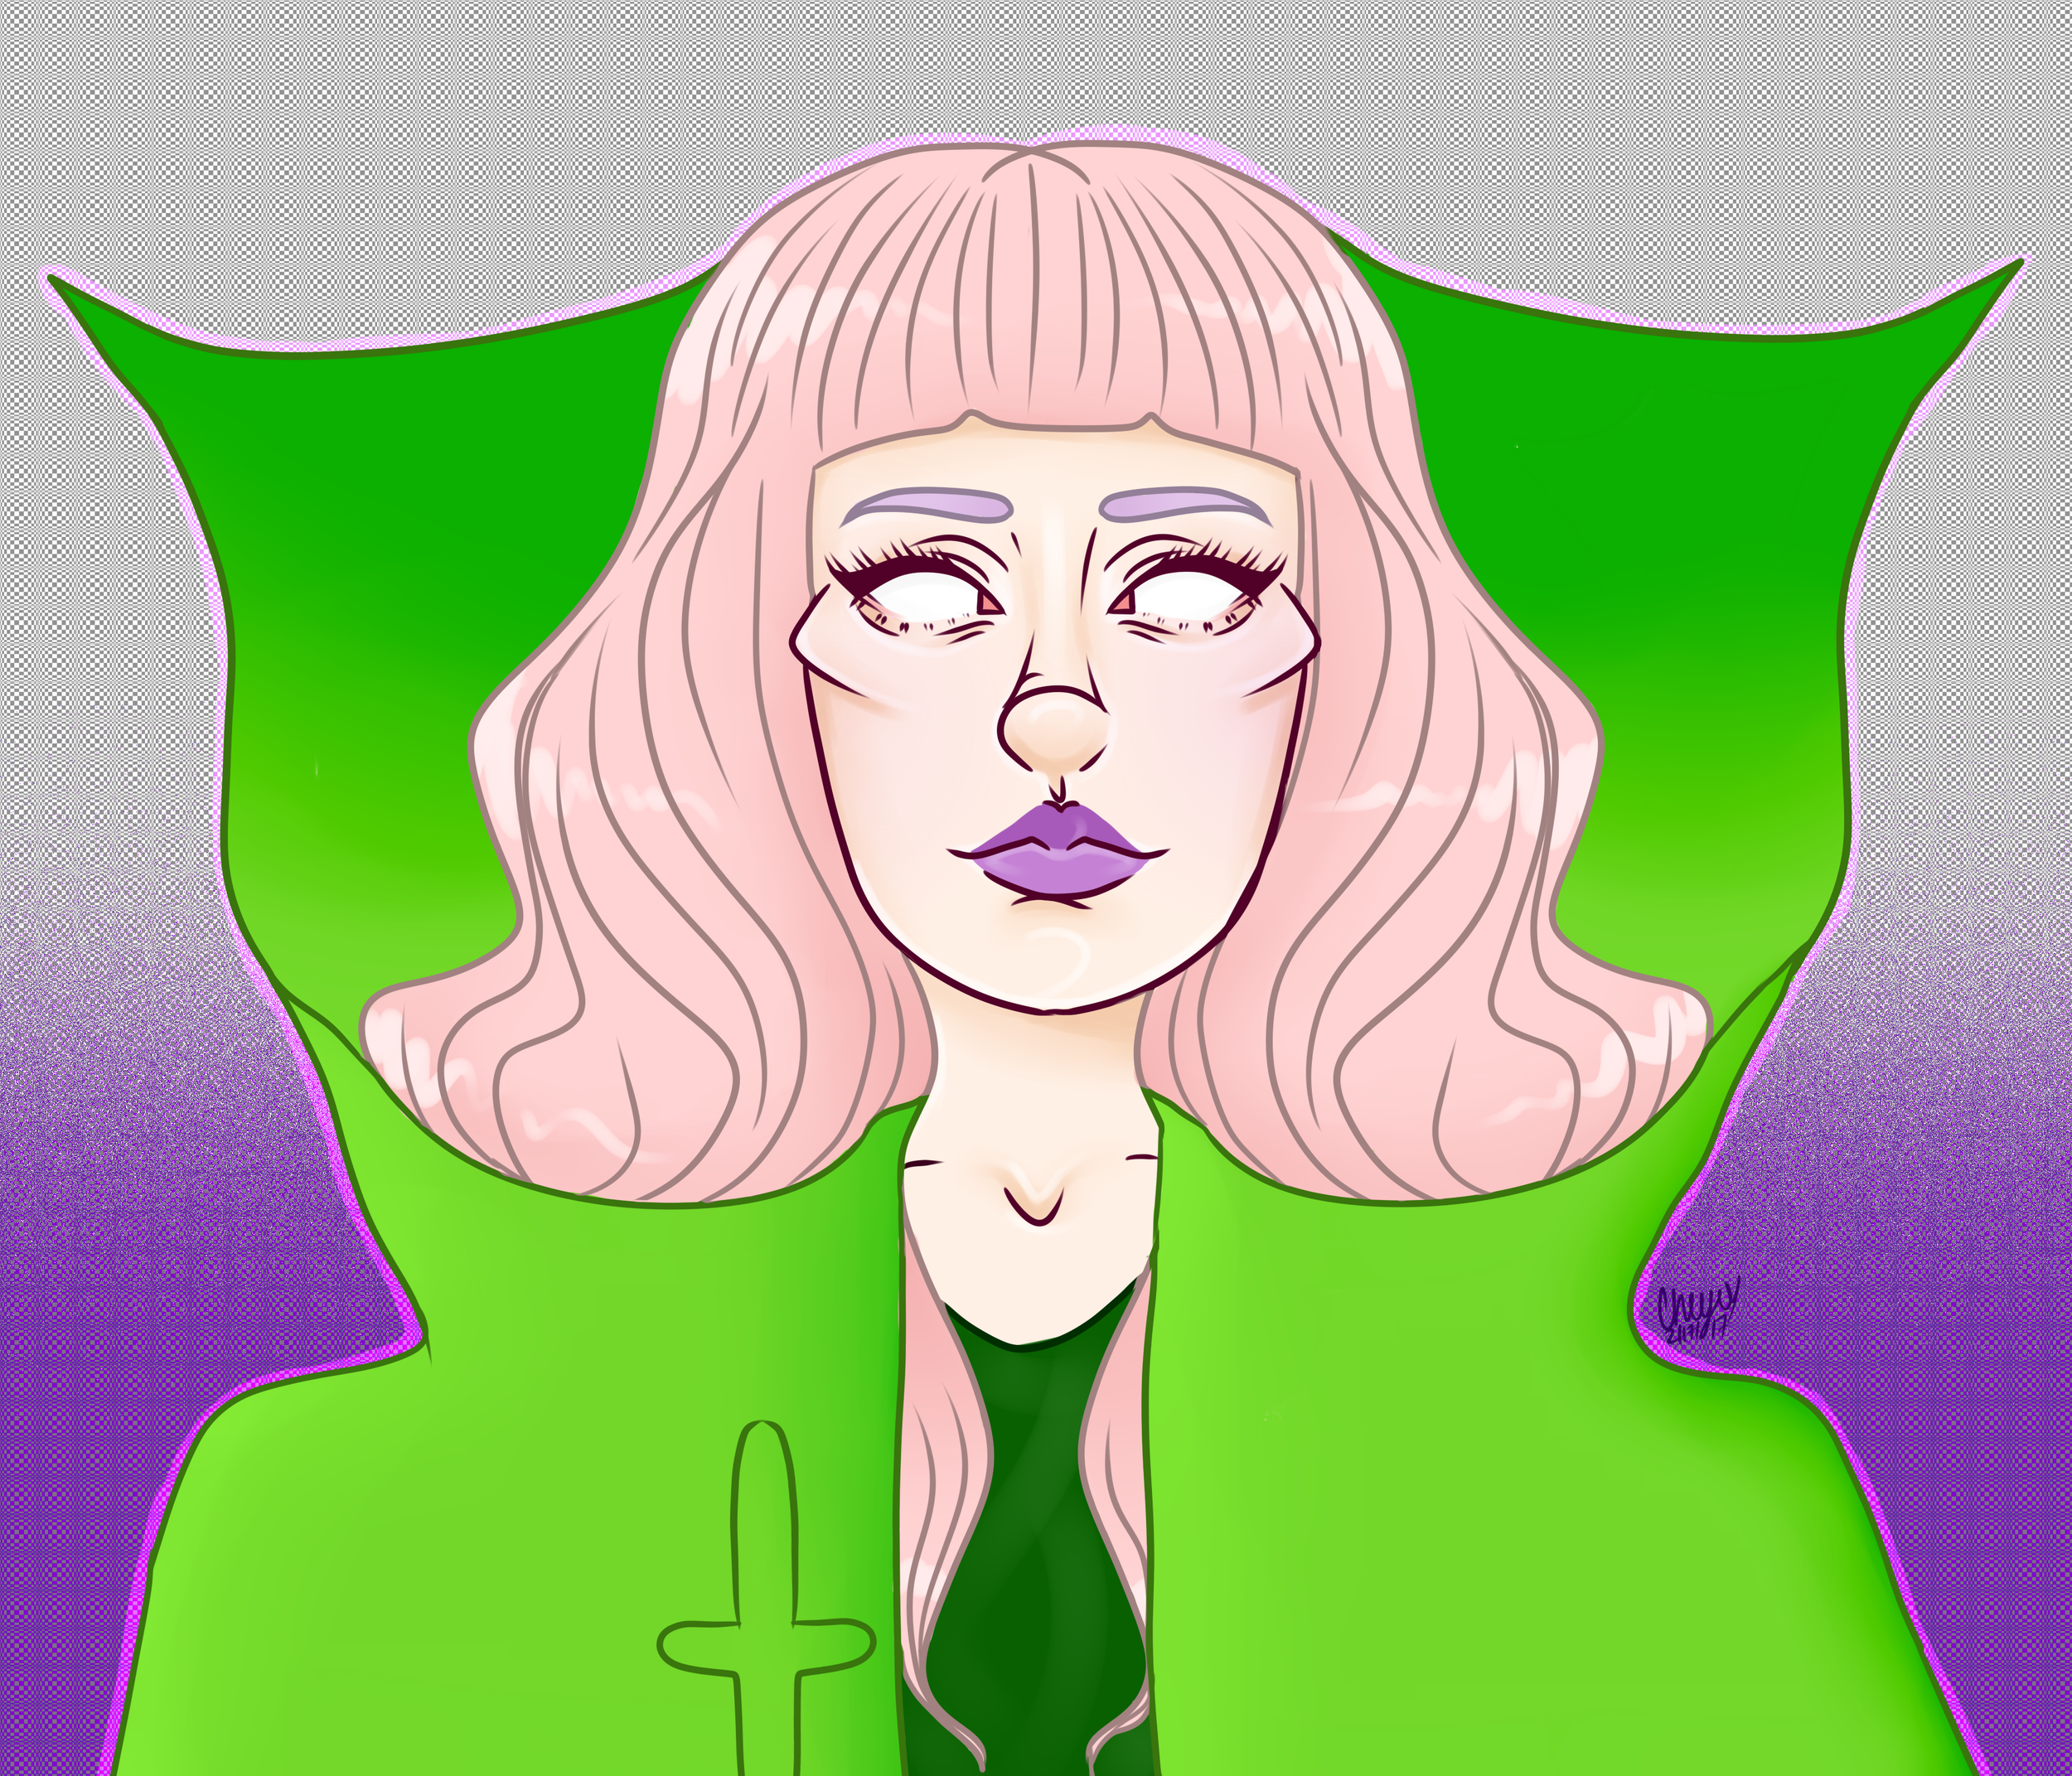 belladonna-of-sadness-but-like-green-isnt-a-sad-color-so-this-isnt-that-accurate.png